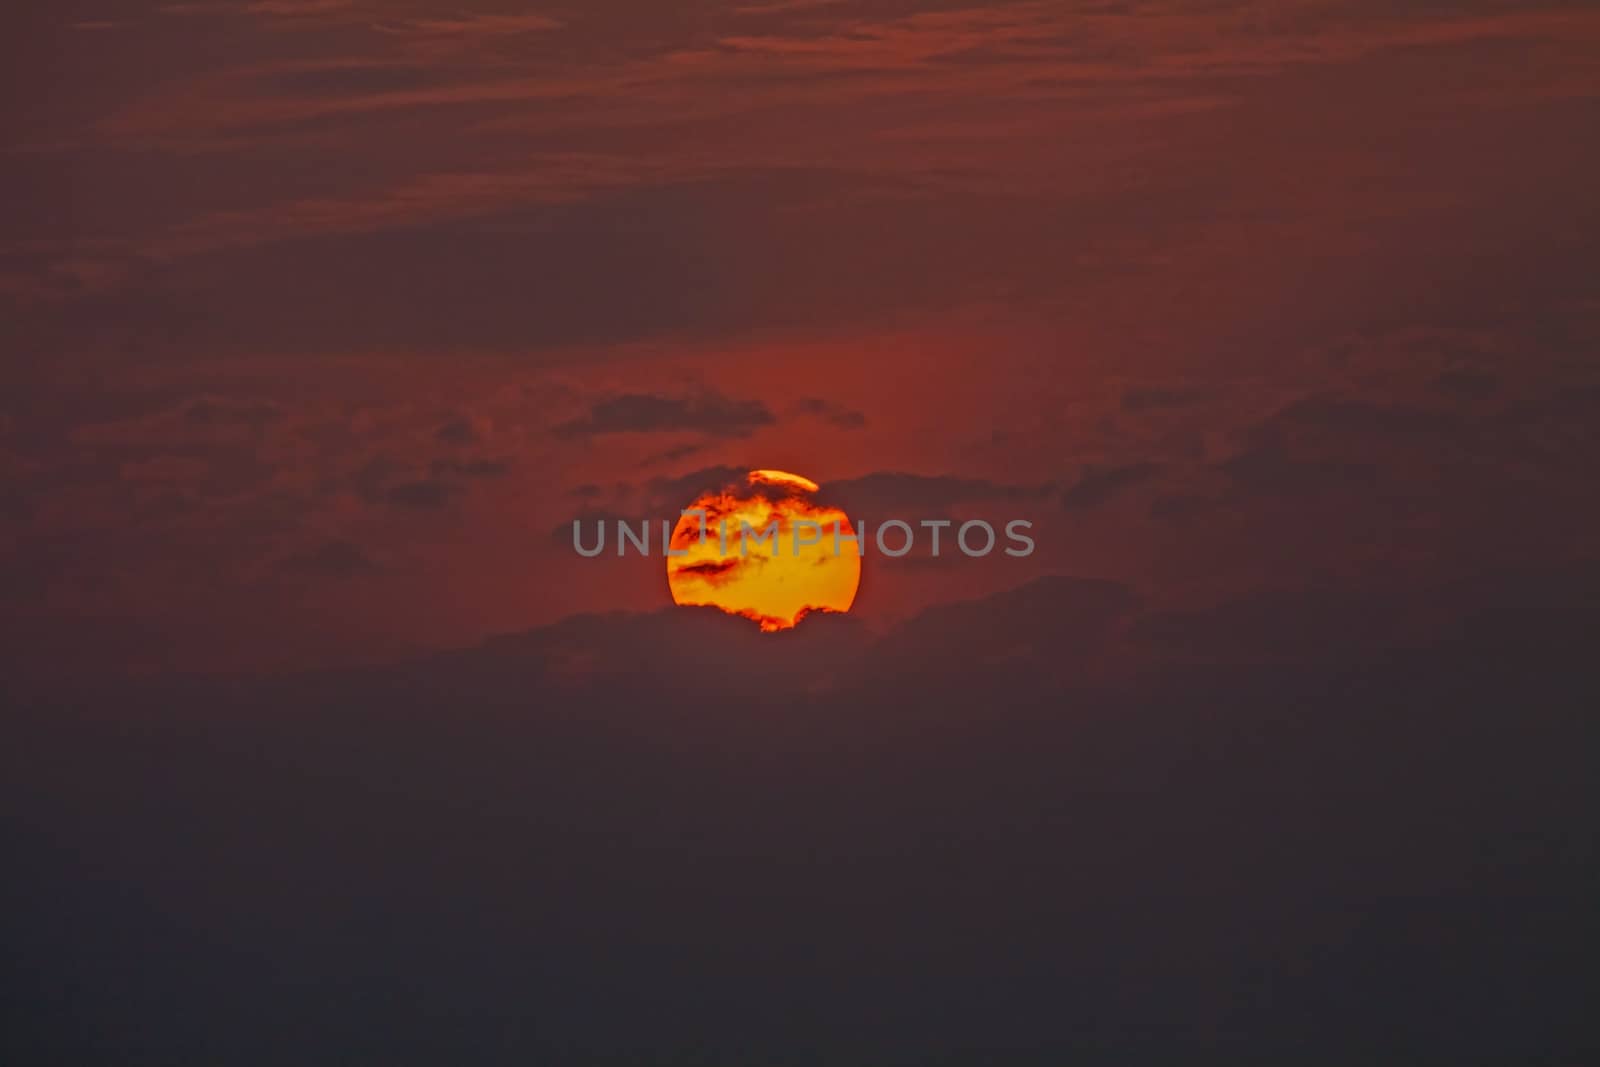 The Orange Globe of Setting Sun is partially hidden by the clouds which seem to float in front in this tropical sunset scene.